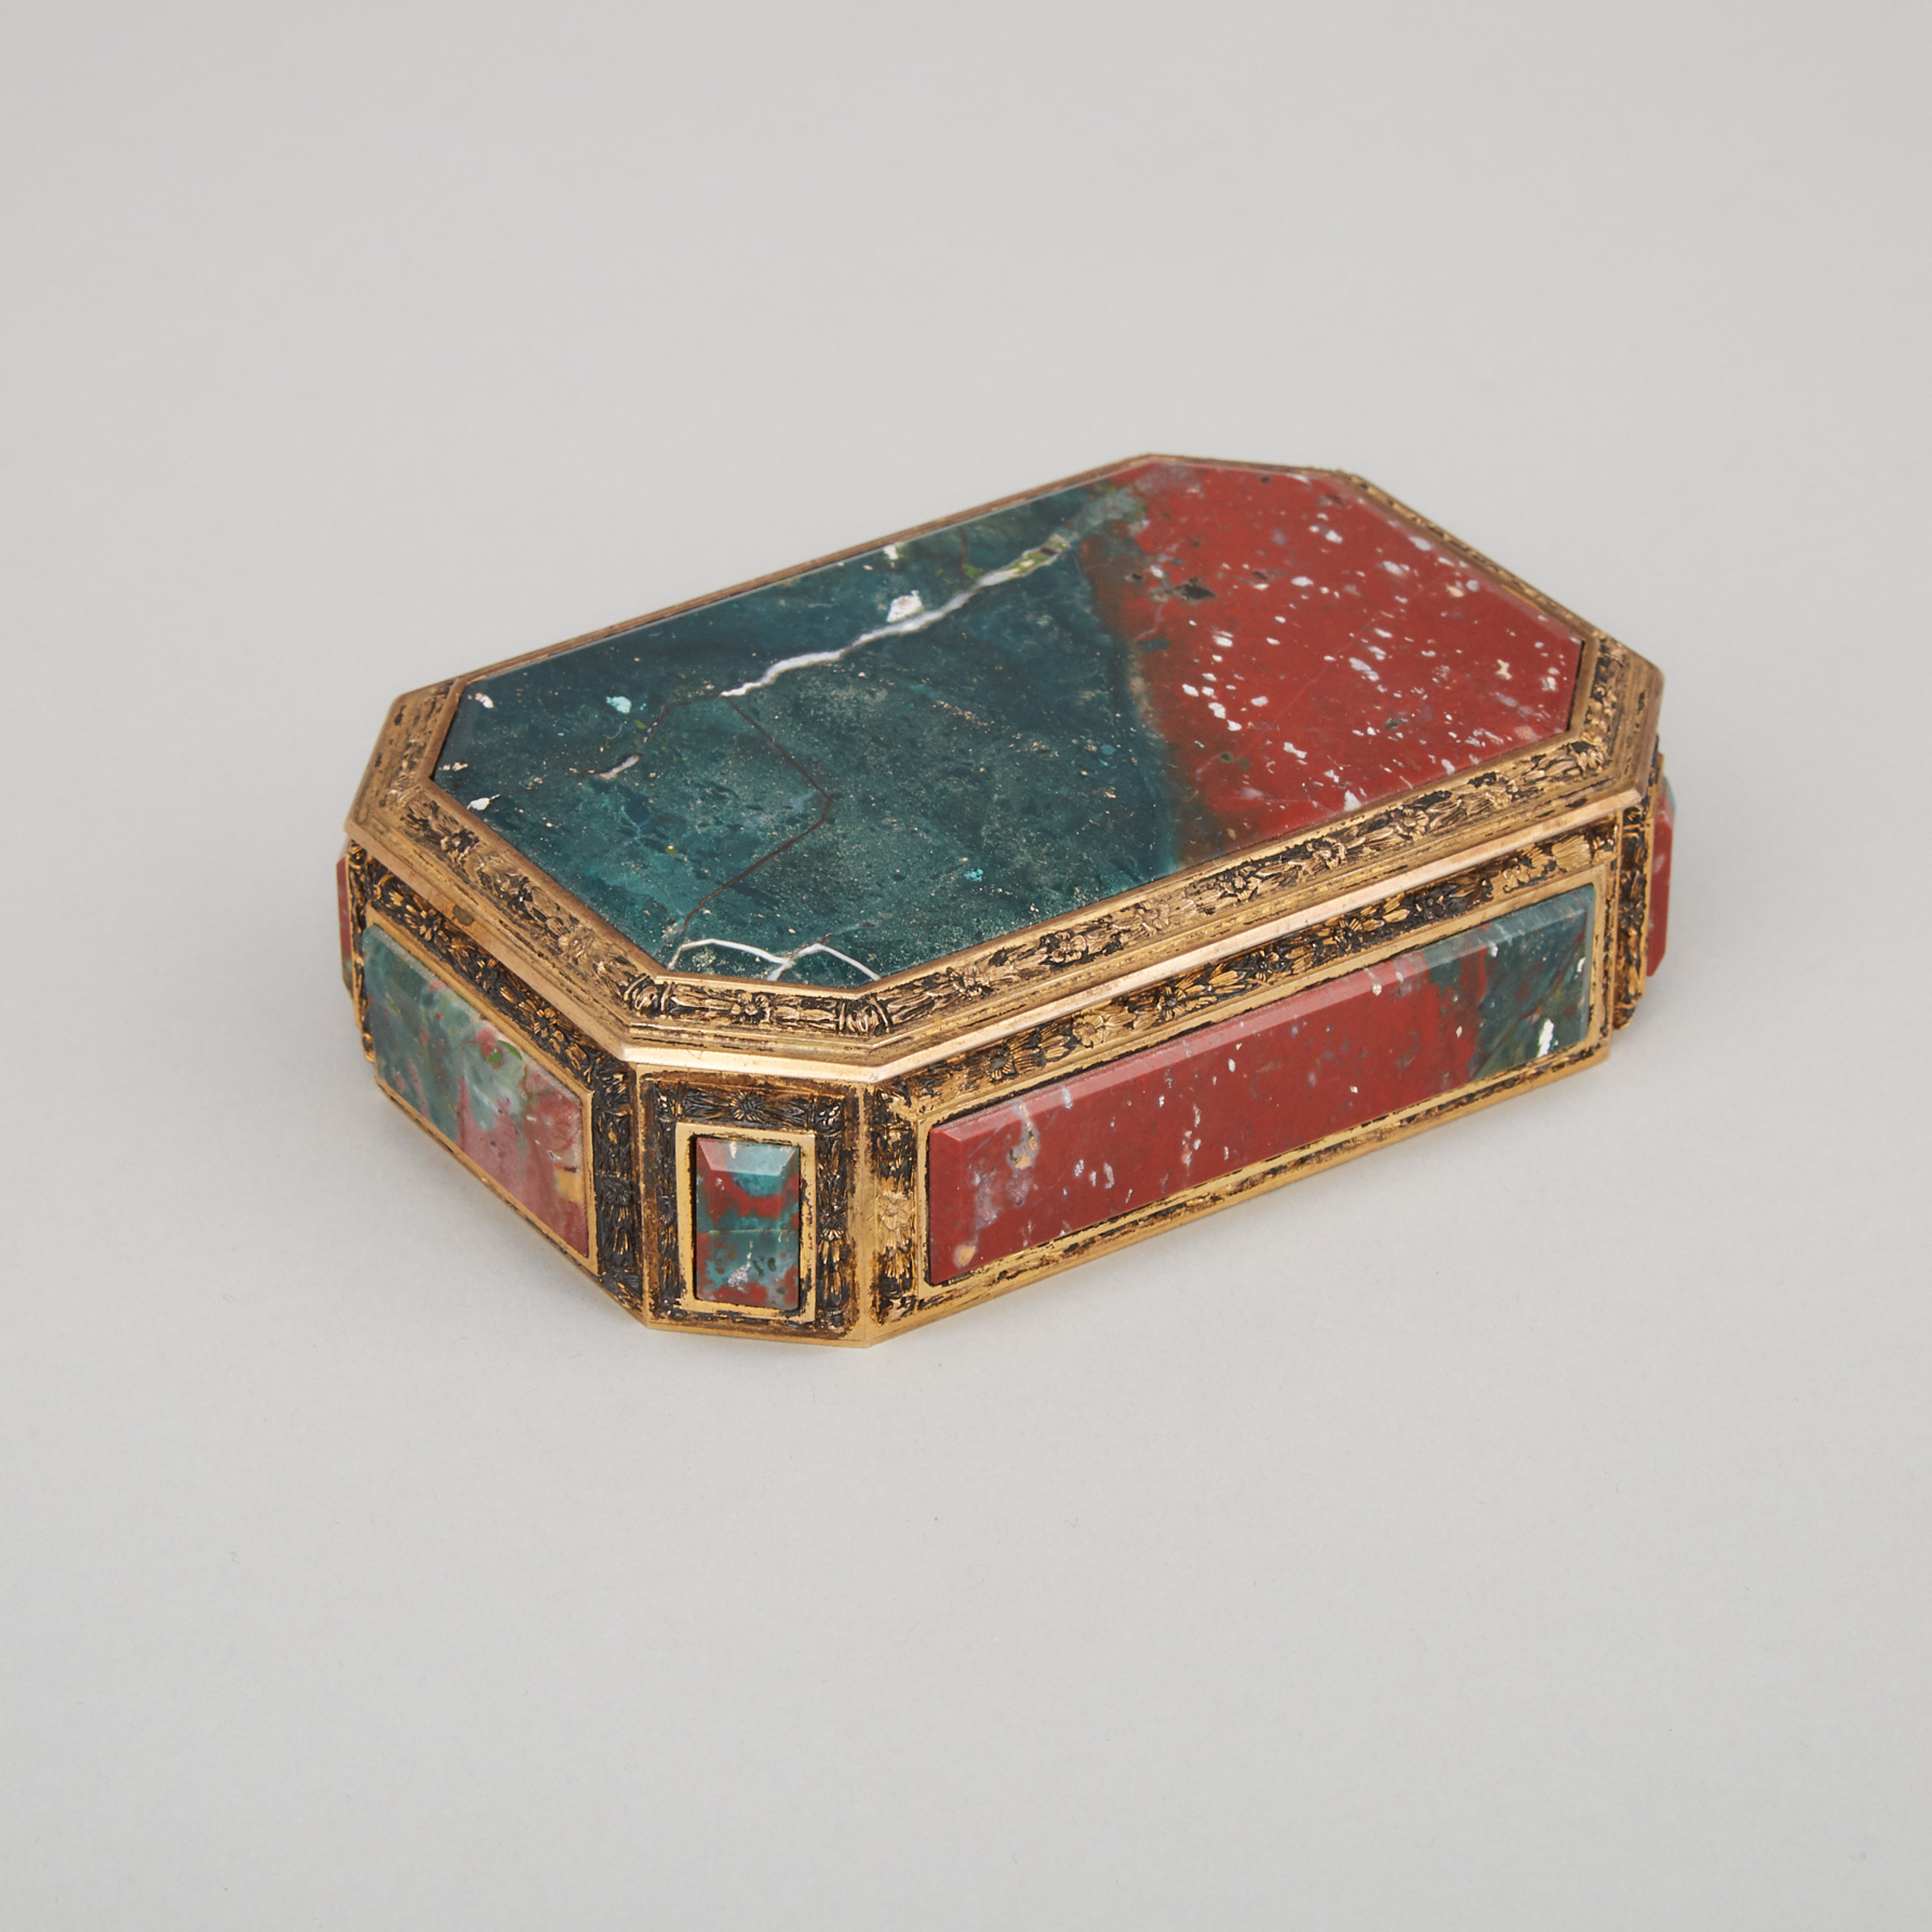 Italian Silver-Gilt Mounted Jasper and Bloodstone Box, for Meister, Zurich, c.1960